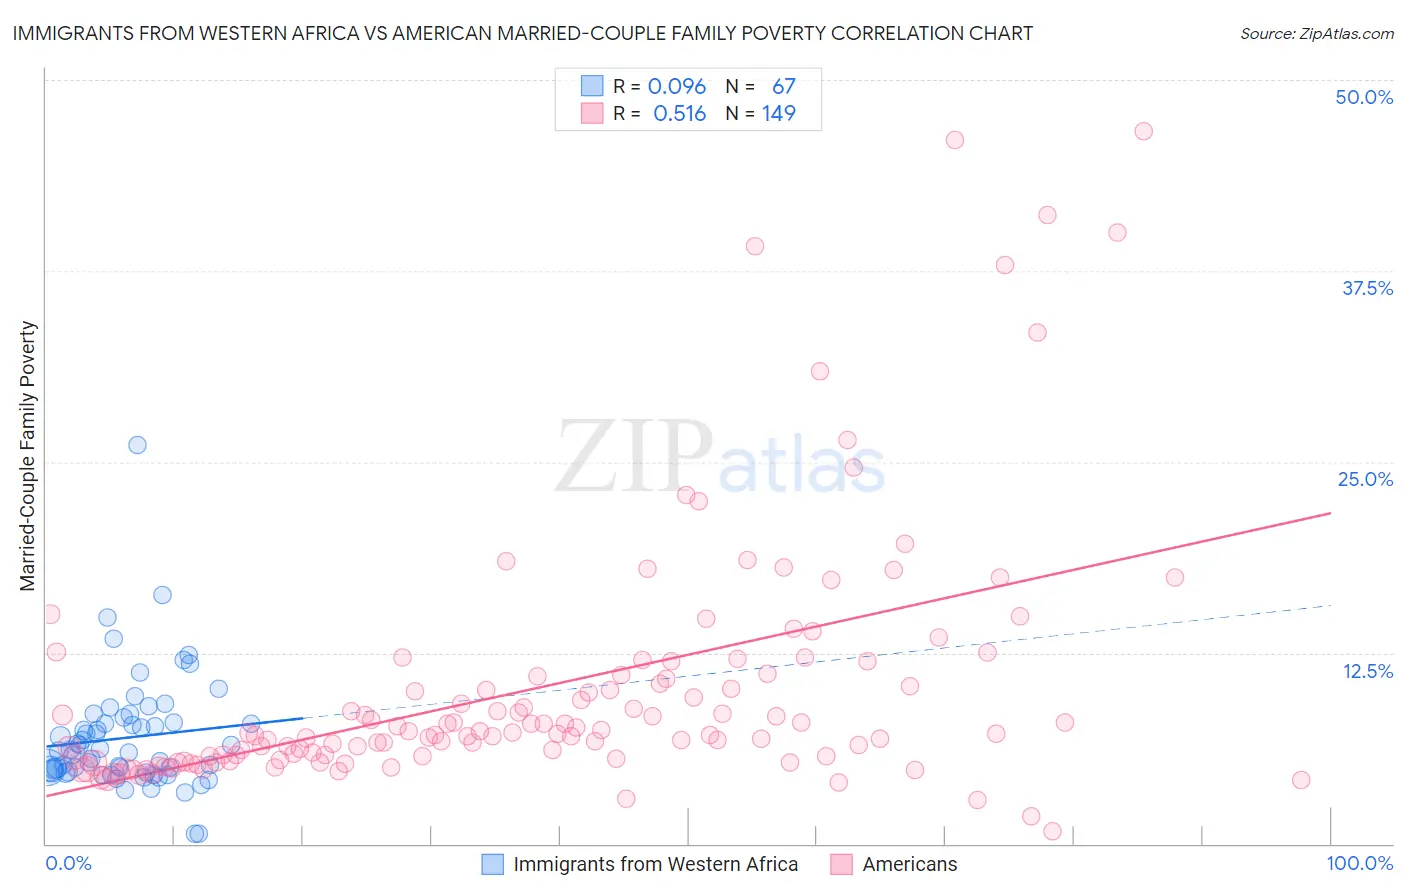 Immigrants from Western Africa vs American Married-Couple Family Poverty